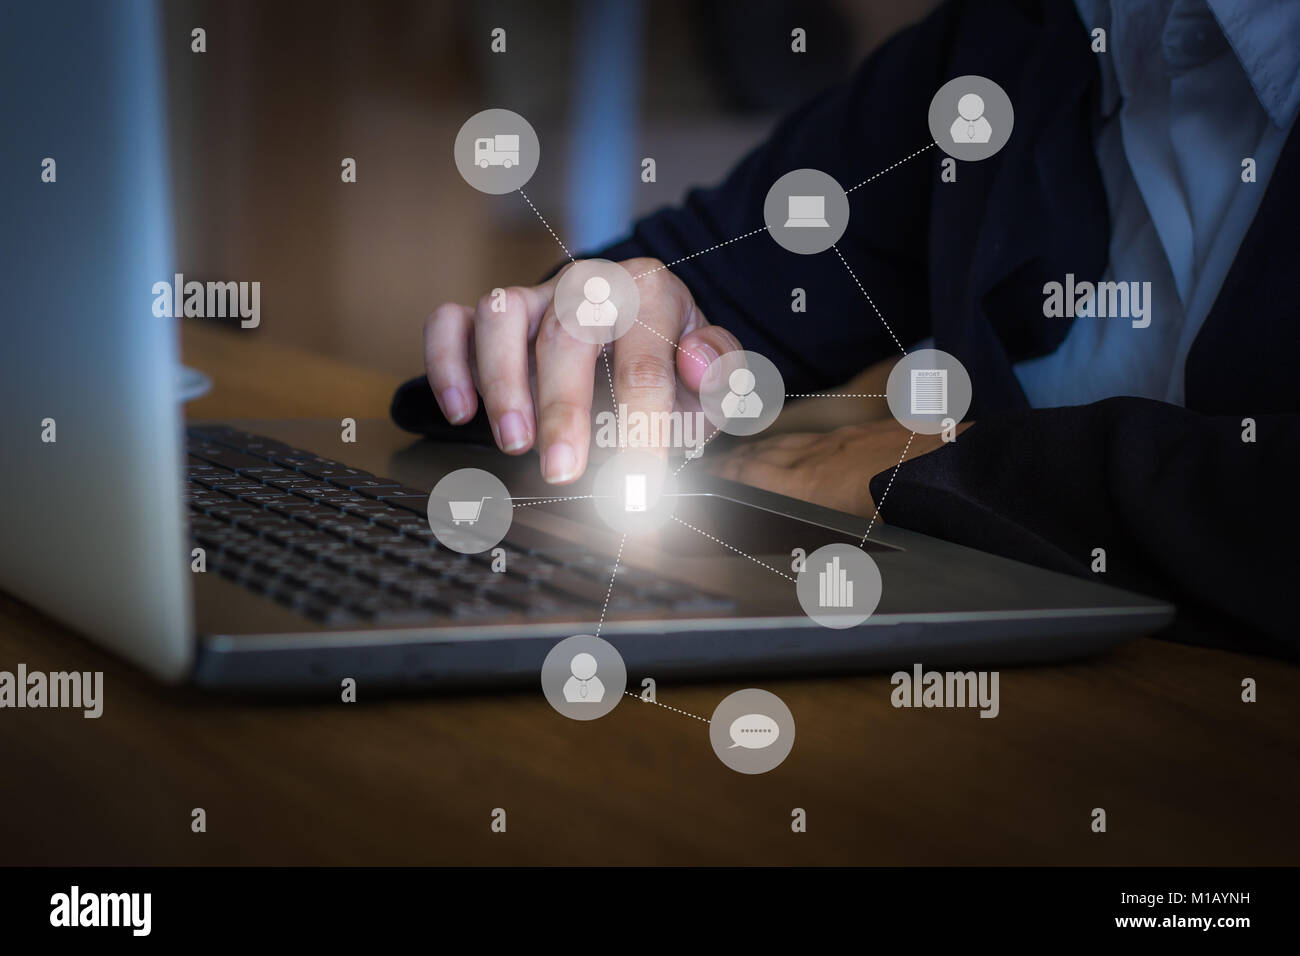 Business hand using laptop connecting people with digital worldwide. Concept business strategy plan. Stock Photo